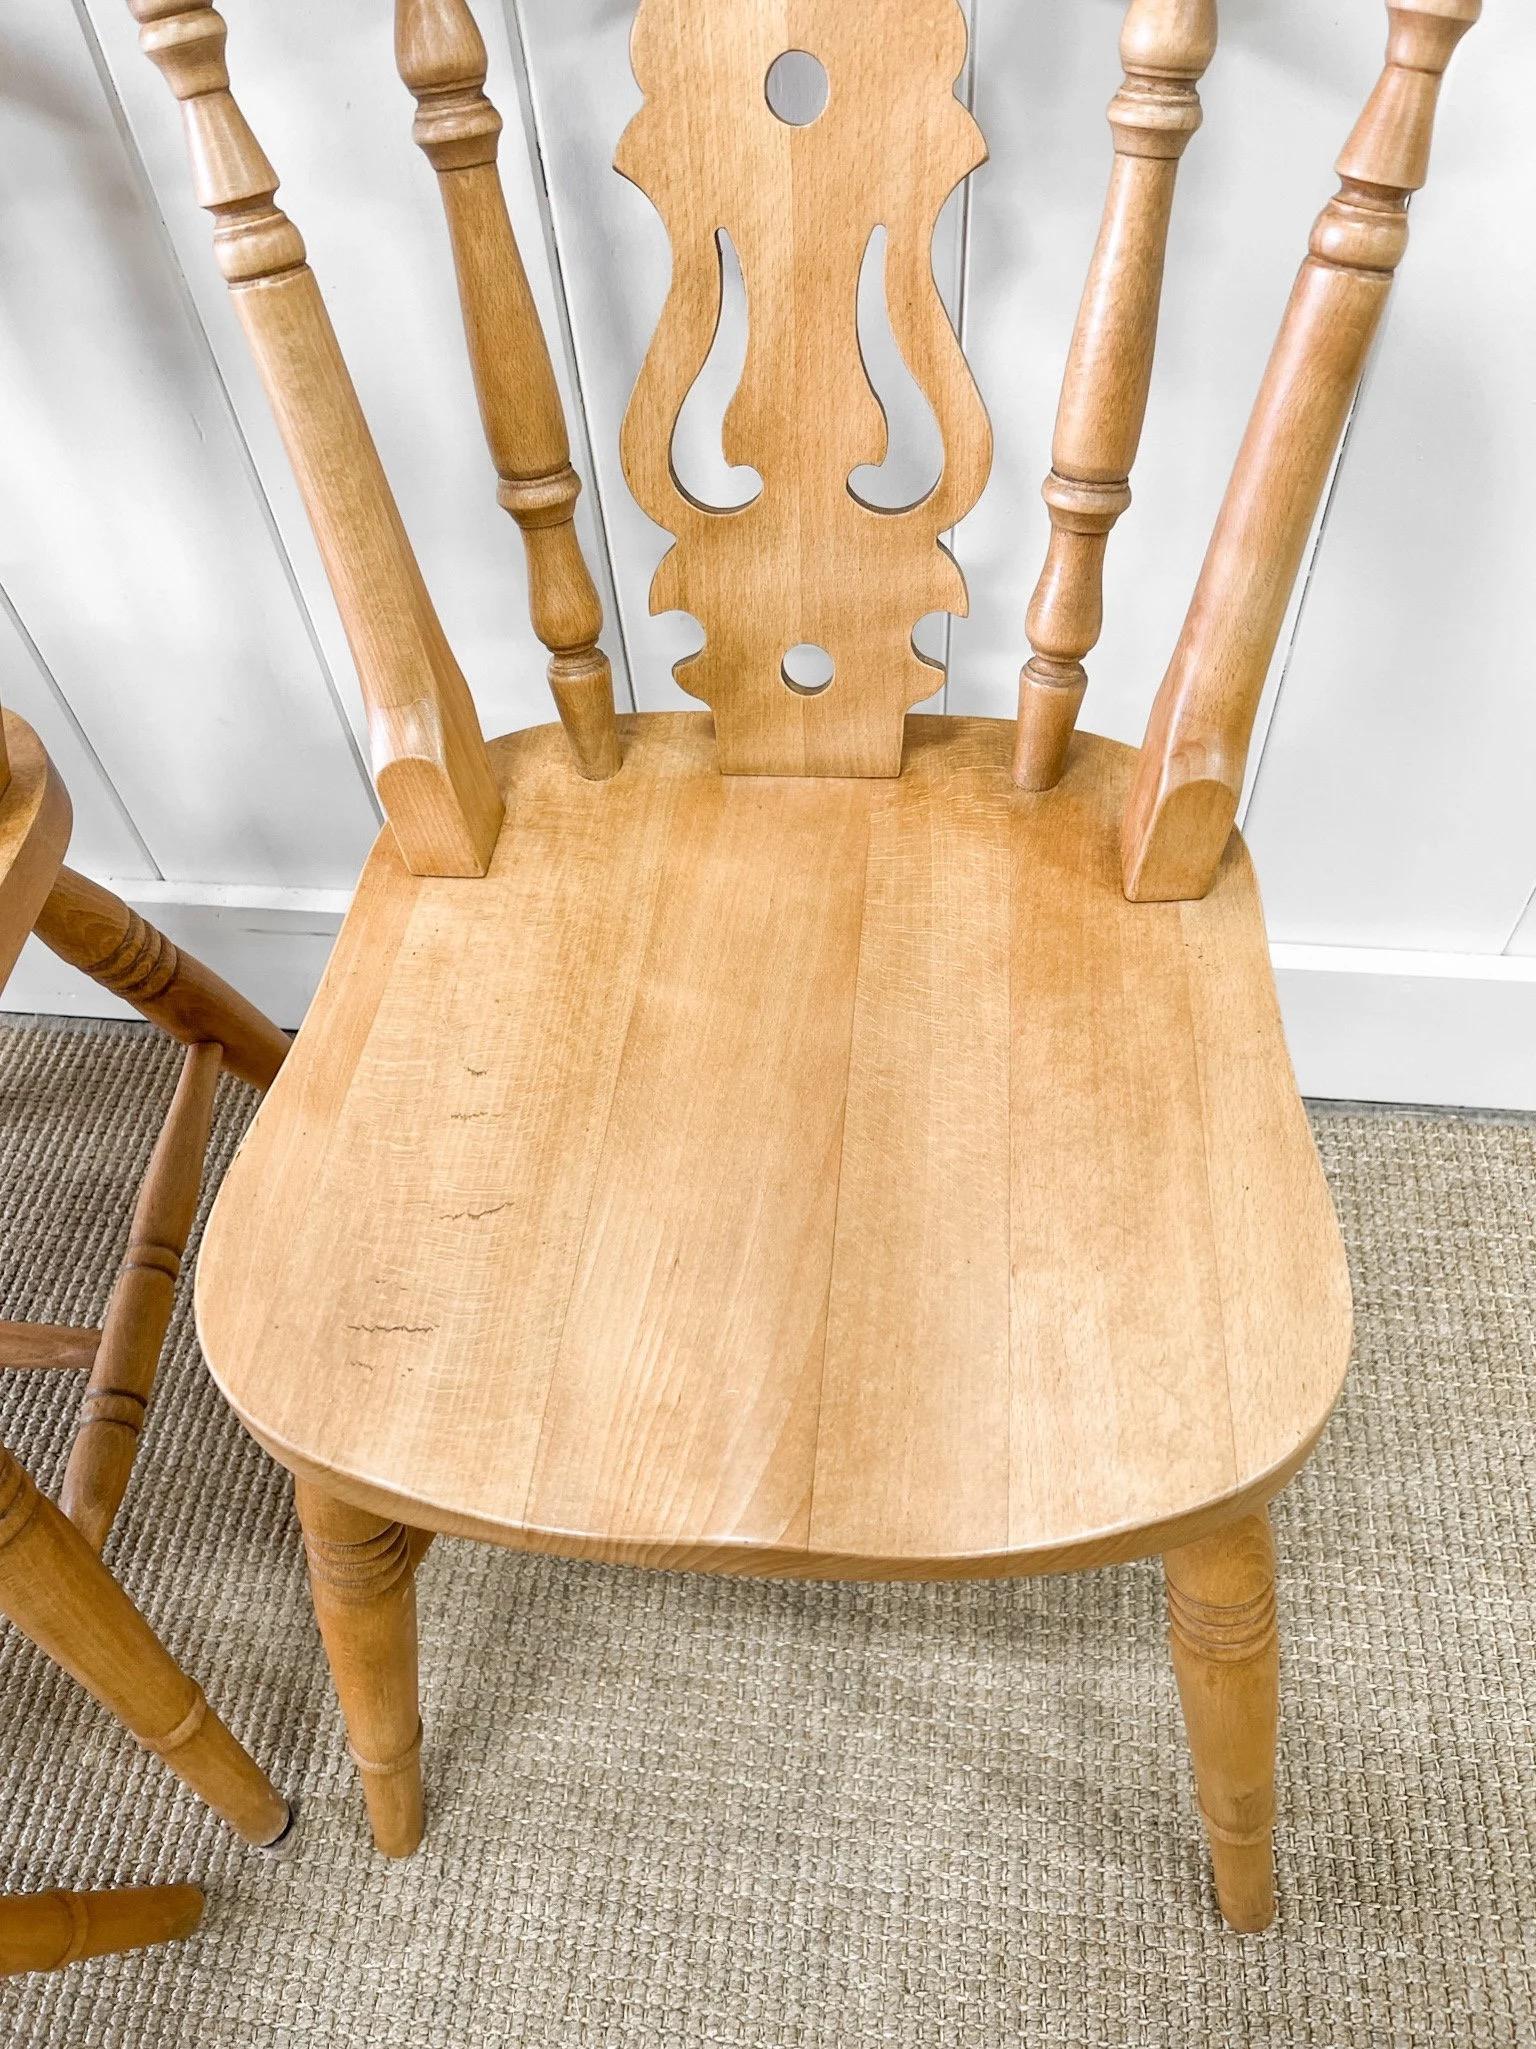 British A Vintage Set of 6 Fiddleback Chairs For Sale